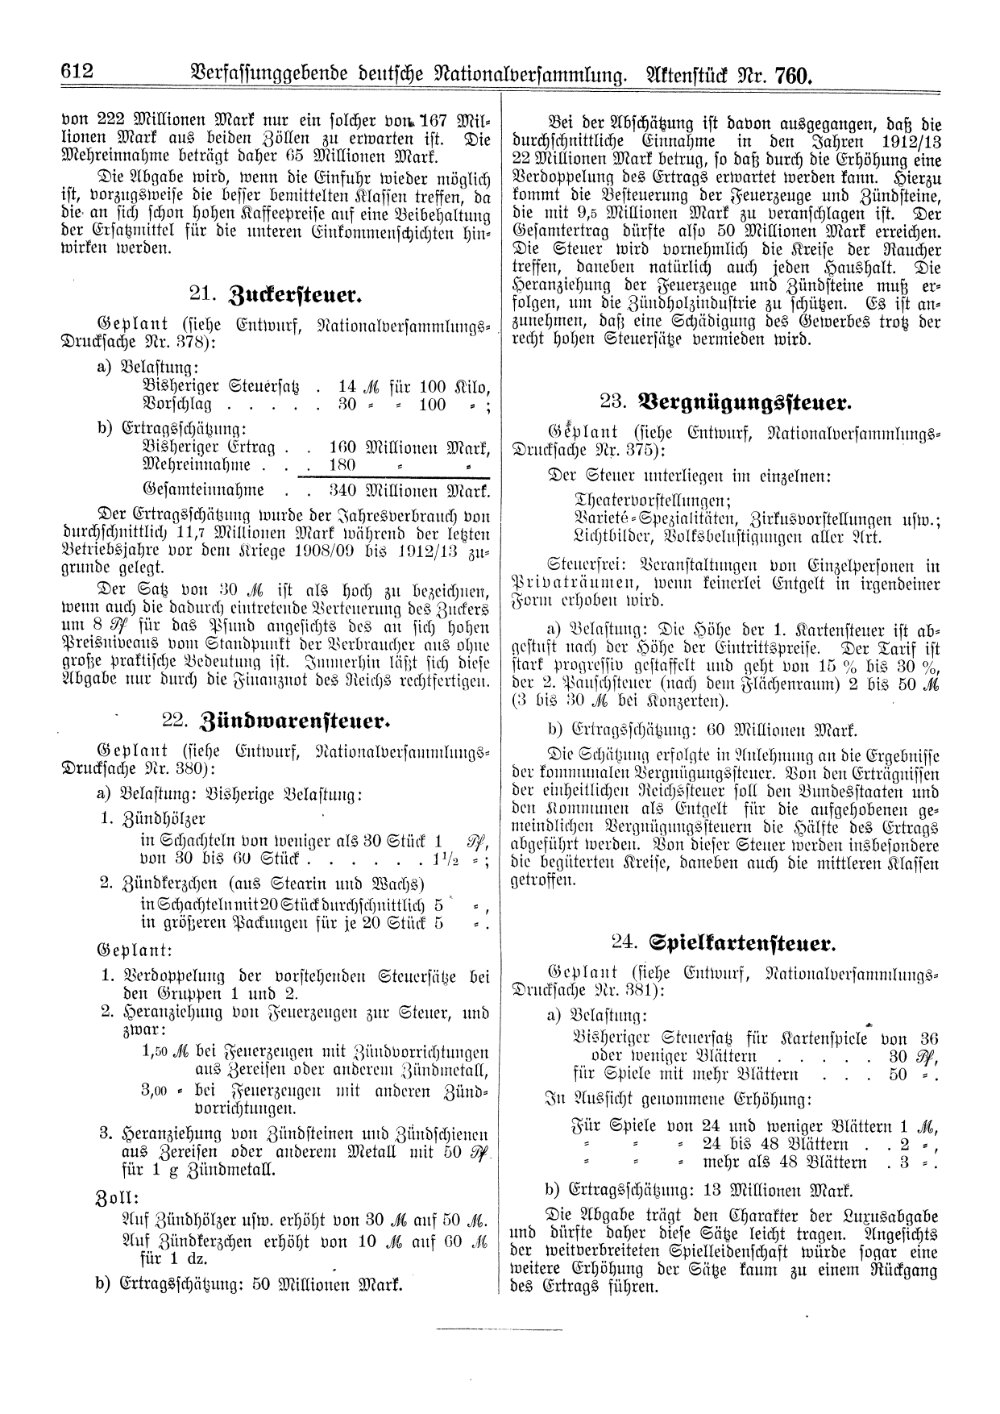 Scan of page 612